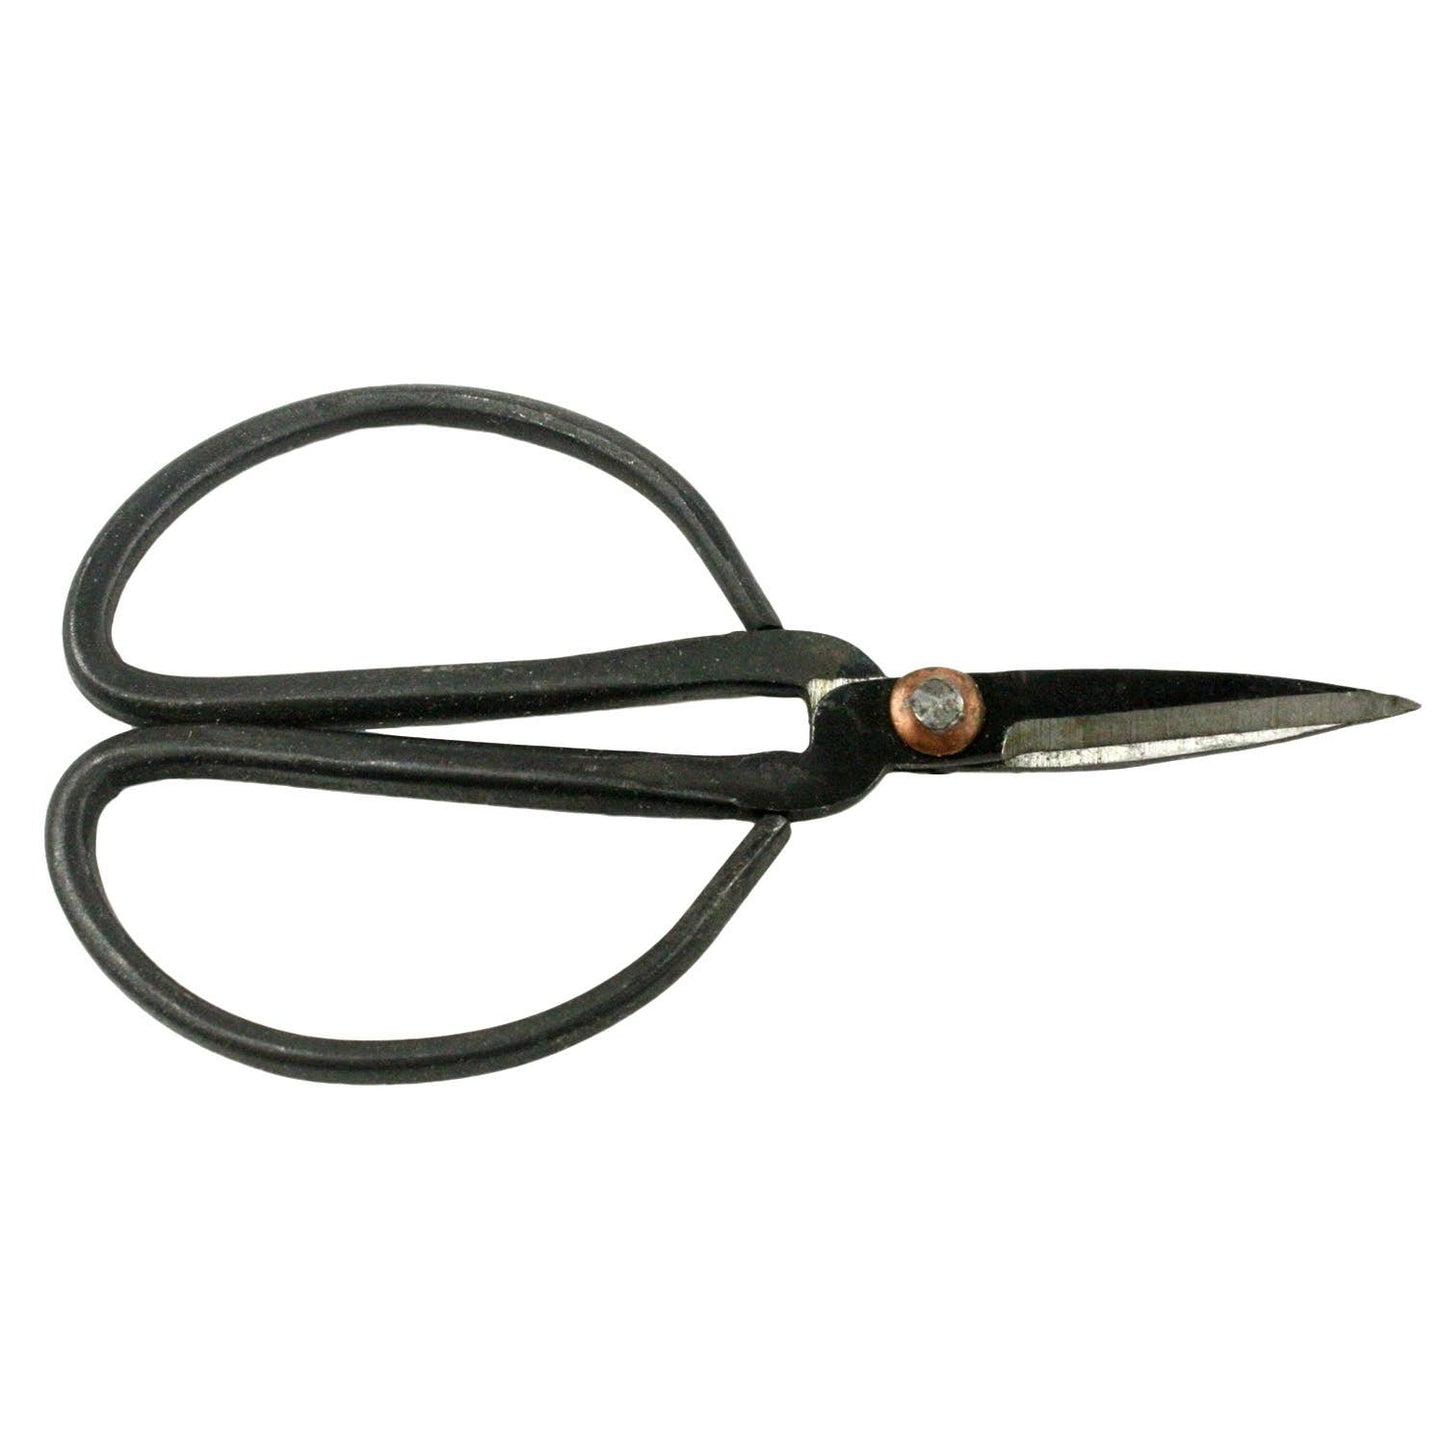 Forged Iron Utility Shears - Sm - Natural